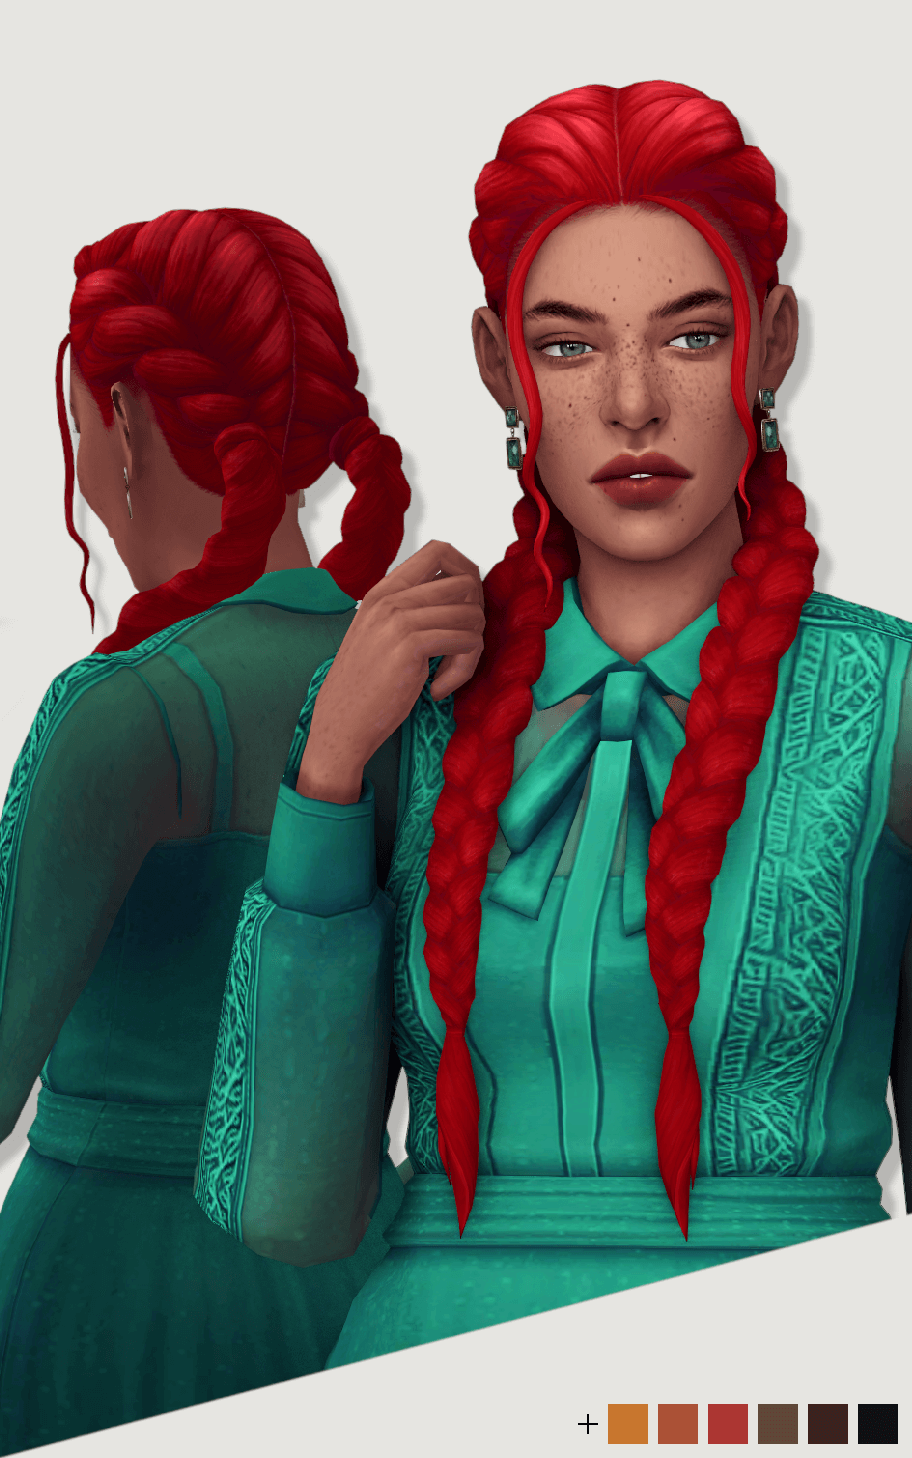 The Sims Maxis Match Hair Collection Custom Content Showcase Vrogue